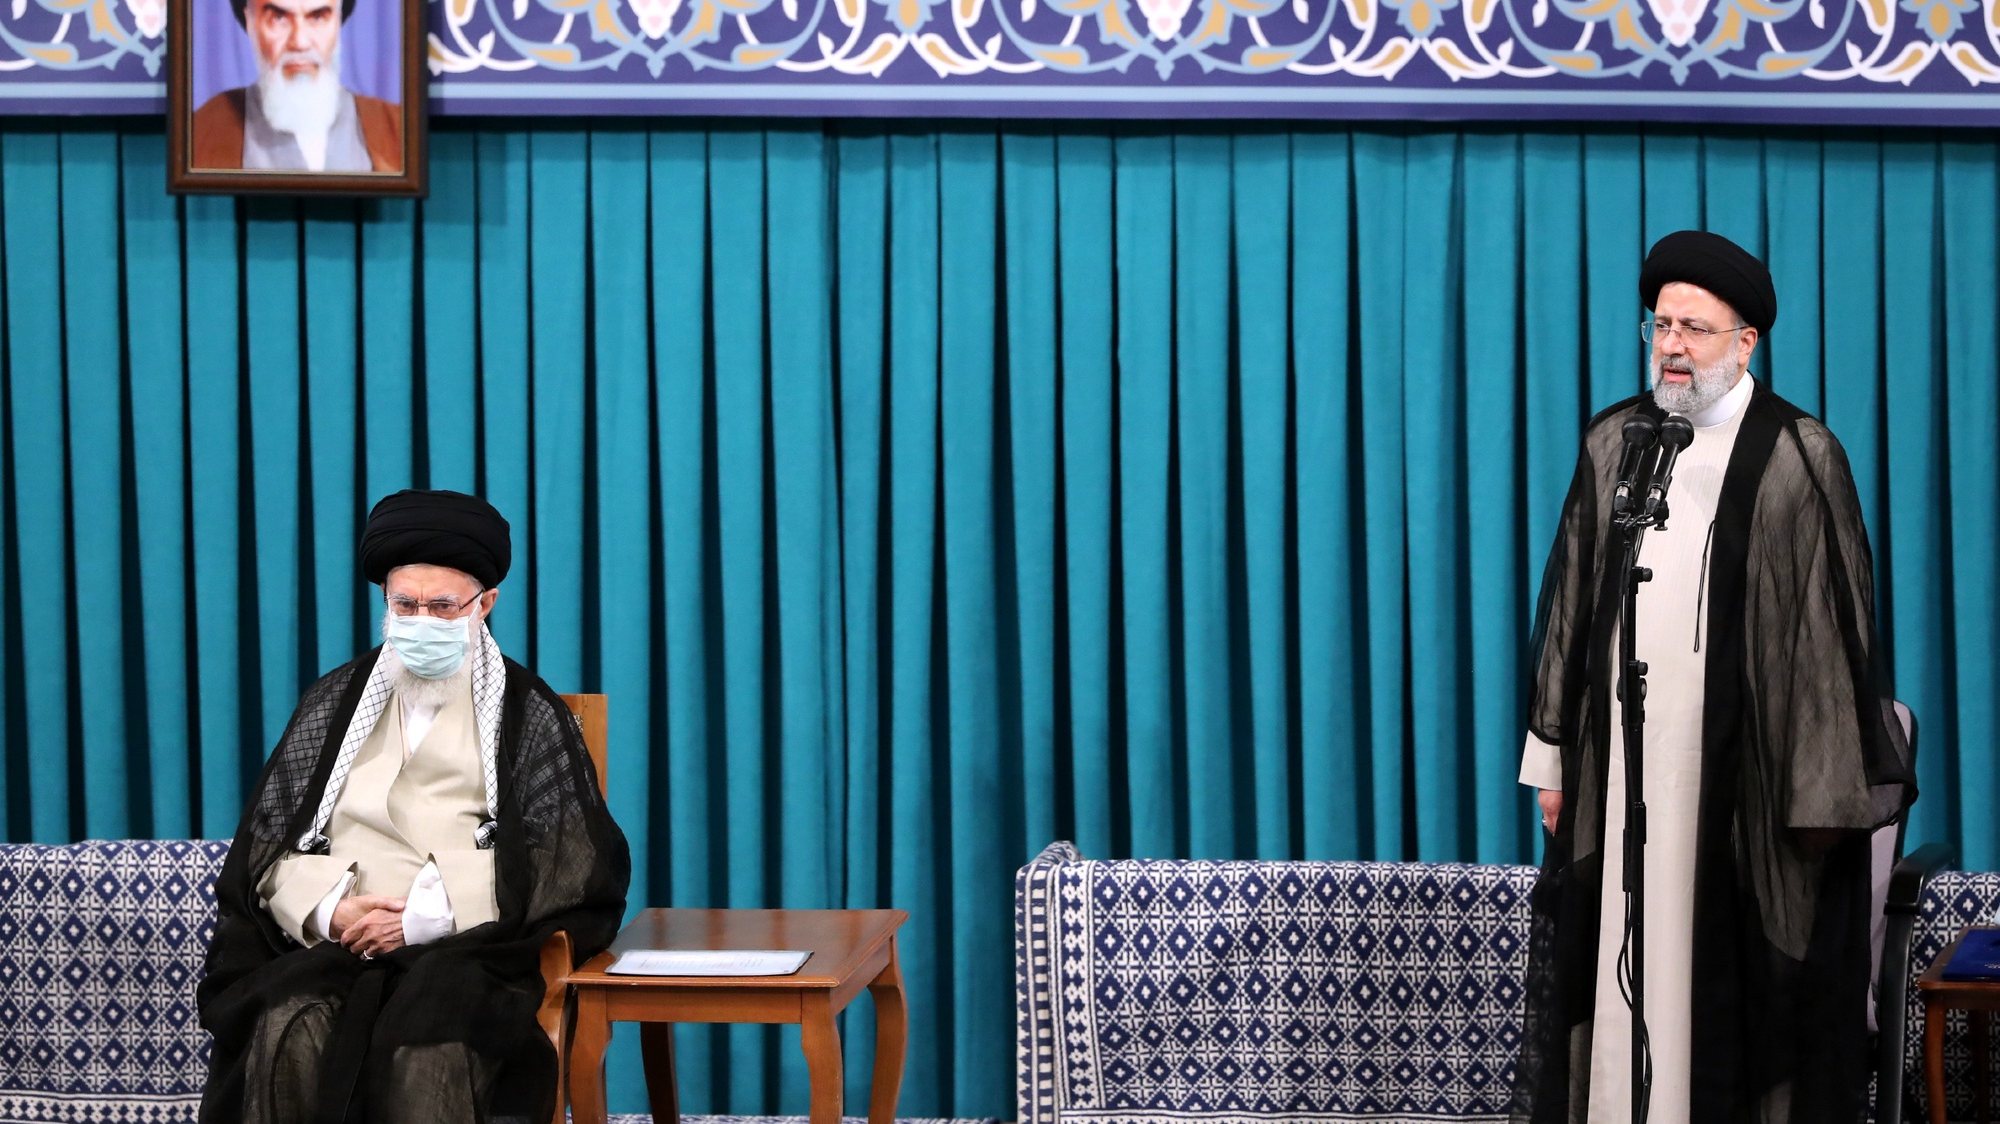 epa09389953 A handout picture made available by Iran&#039;s Supreme Leader Office shows Iranian supreme leader Ayatollah Ali khamenei (L) listens to new Iranian president Ebrahim Raisi (R), in Tehran, Iran, 03 August 2021. Iranian presidents are first approved by the supreme leader, who according to constitution is the actual head of state, and then take the oath before parliament. Ebrahim Raisi has been inaugurated as the new president of the Islamic Republic of Iran on 03 August 2021, as the country is facing an economic crisis along with the coronavirus disease (COVID-19) pandemic.  EPA/IRAN&#039;S SUPREME LEADER OFFICE HANDOUT  HANDOUT EDITORIAL USE ONLY/NO SALES